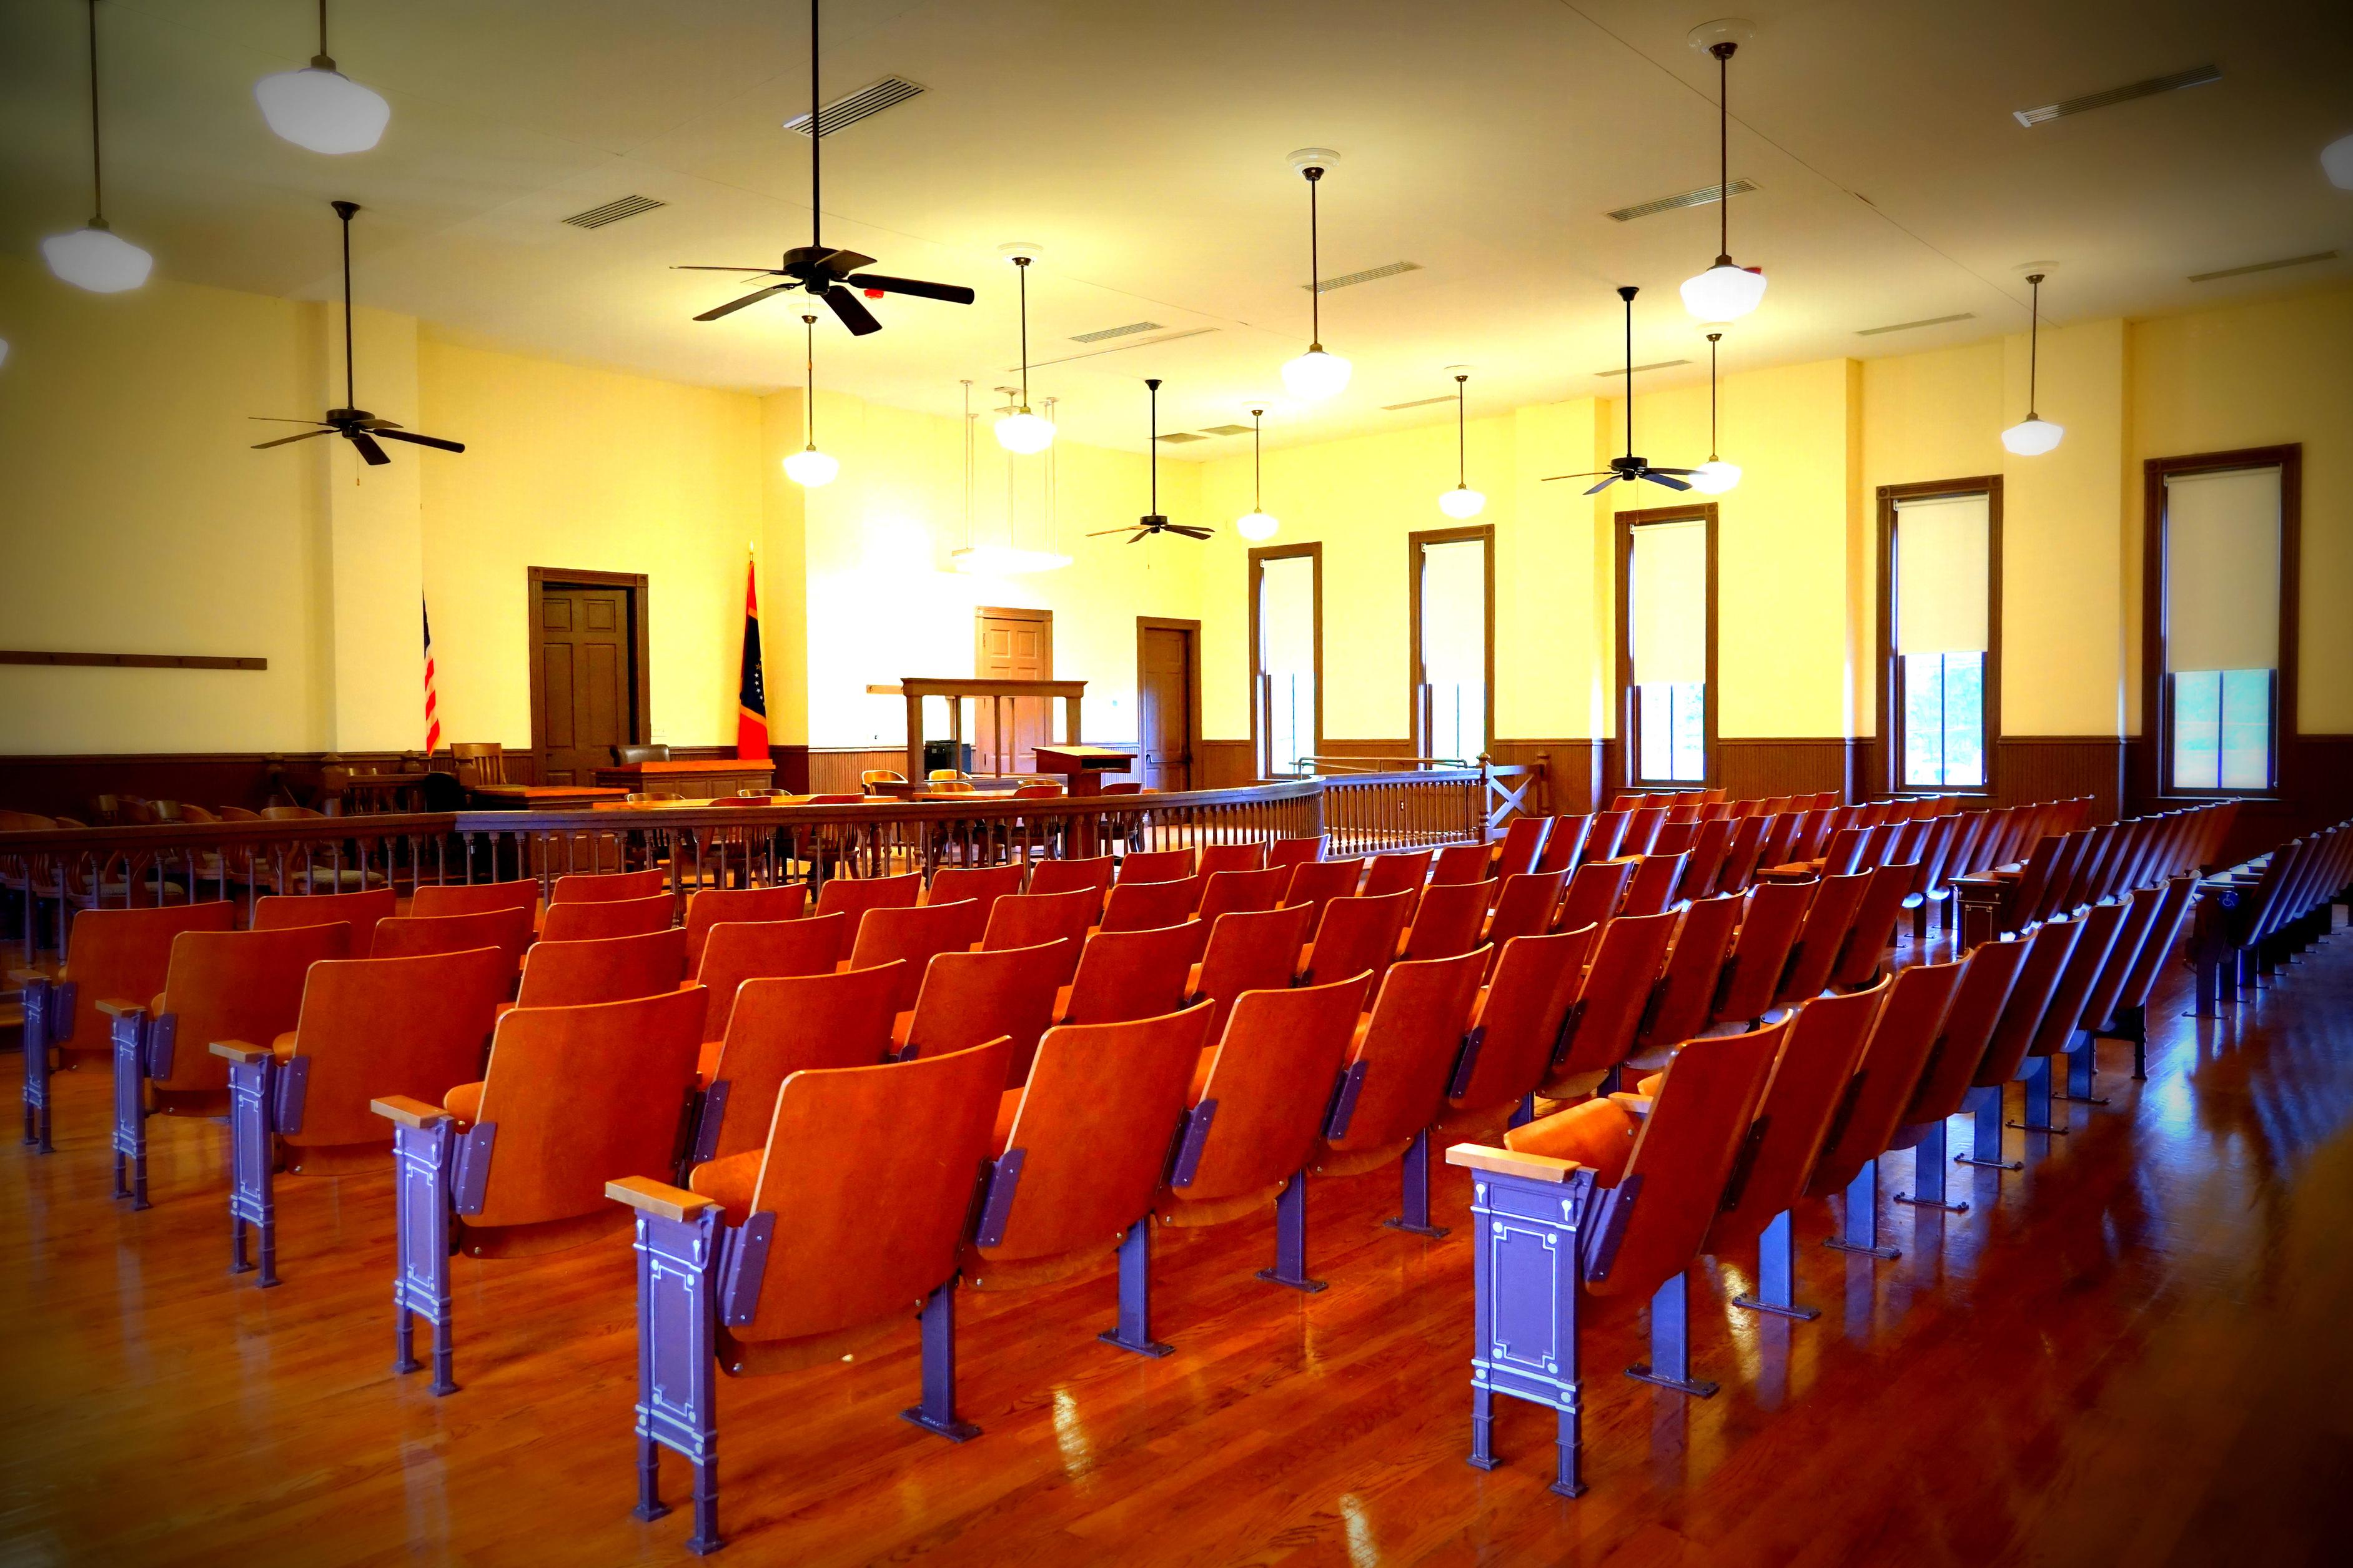 Rows of seats face a bench in an empty courtroom.